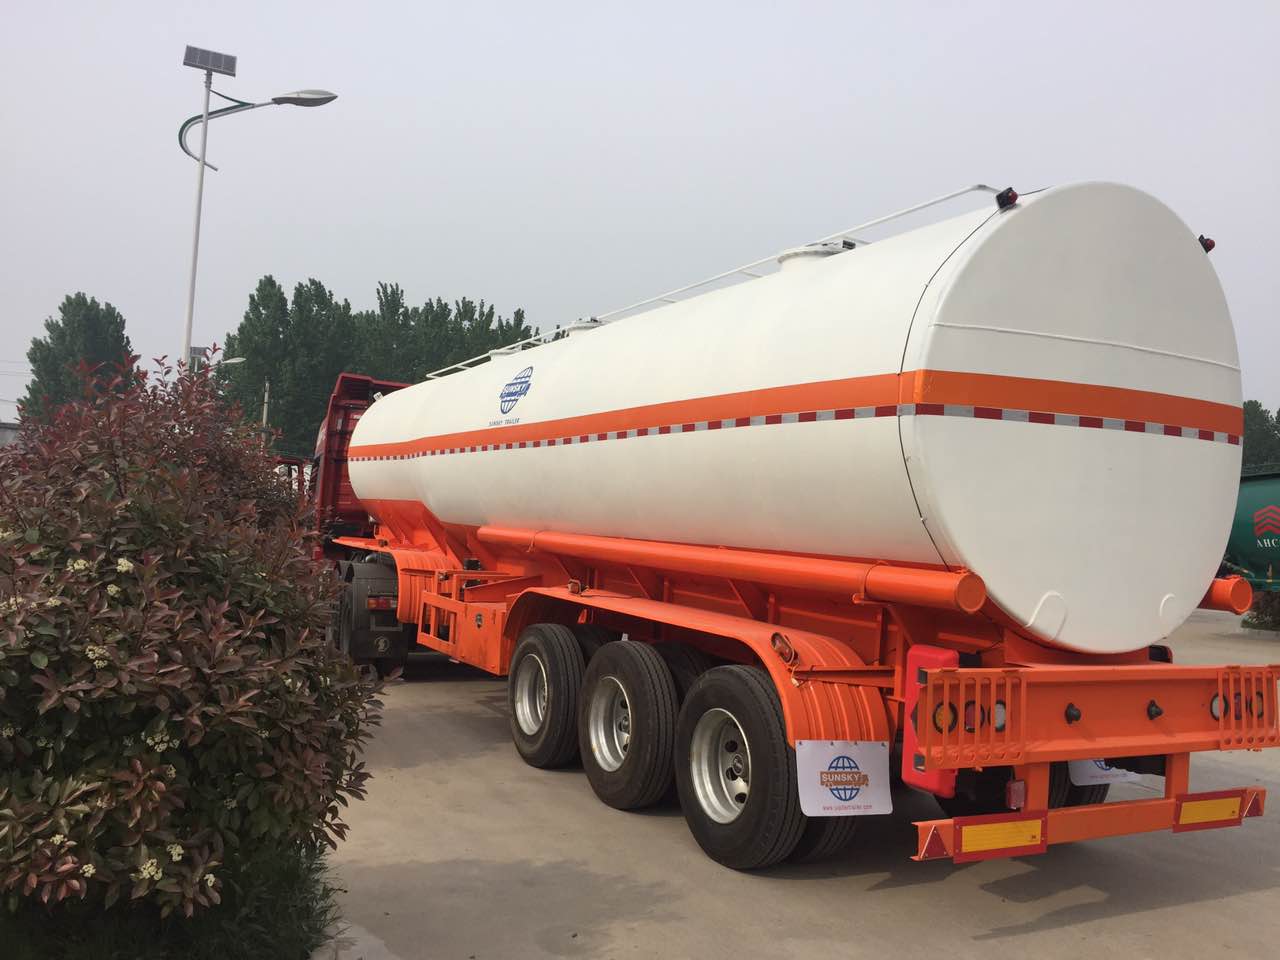 20units of sunsky brand new fuel tanker trailers are shipped to Mozambique